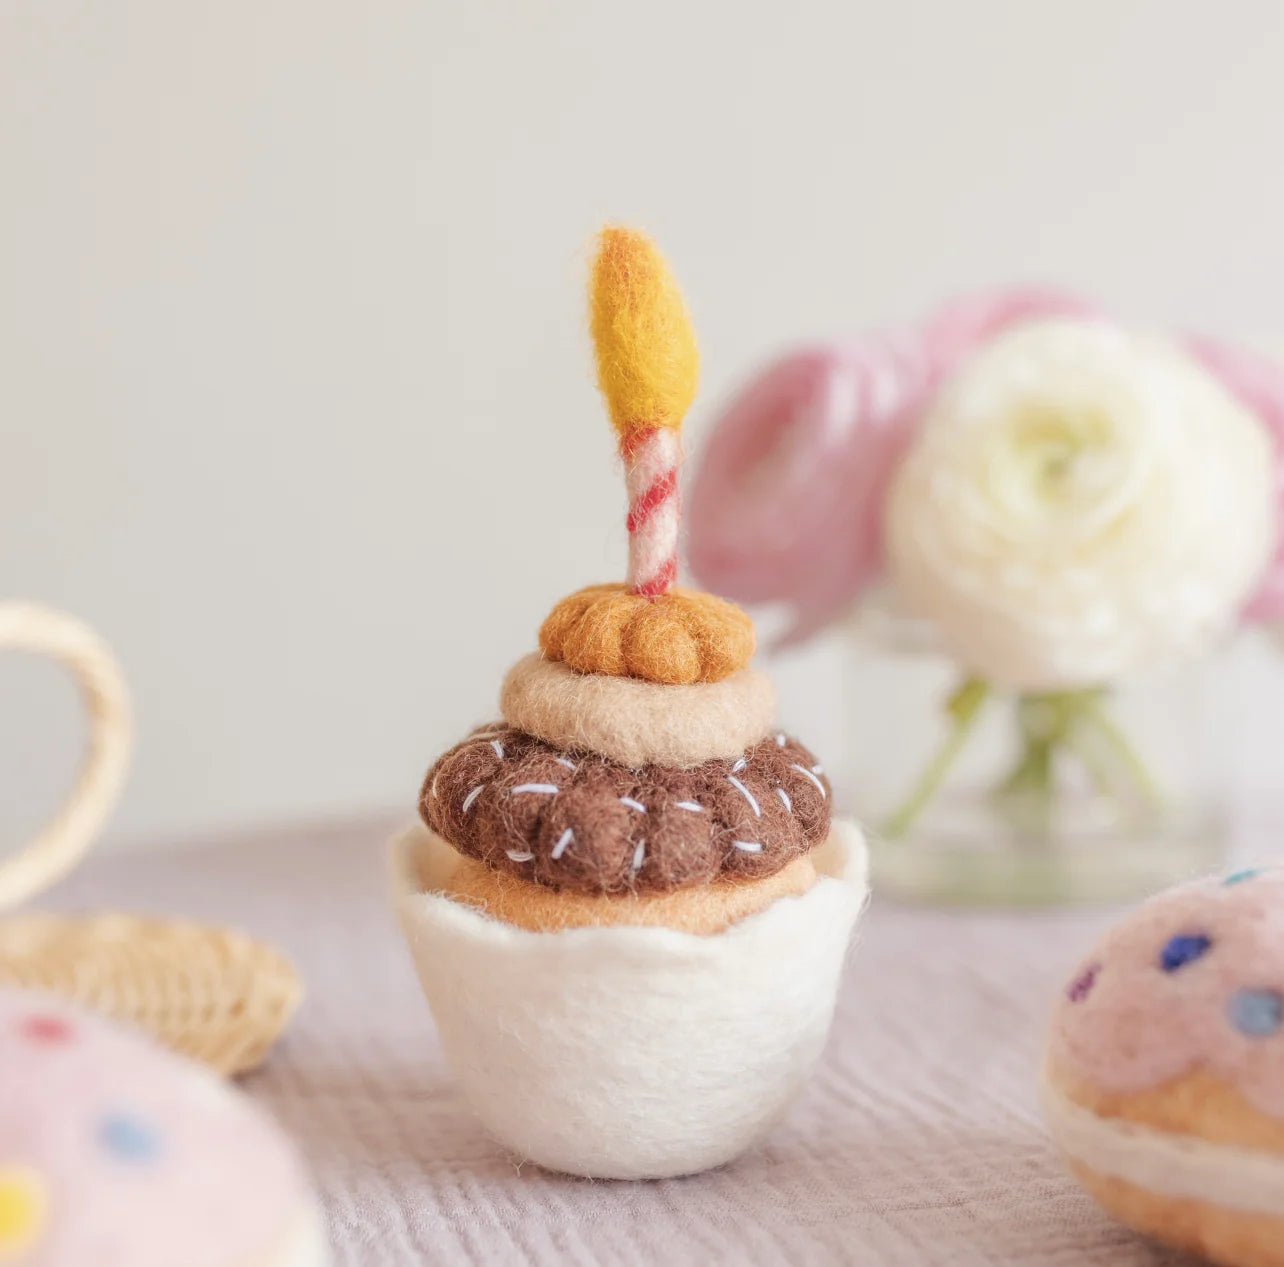 JUNI MOON | WONDERLAND WISH CAKES (2 STYLES) Chocolate Peanut Butter by JUNI MOON - The Playful Collective